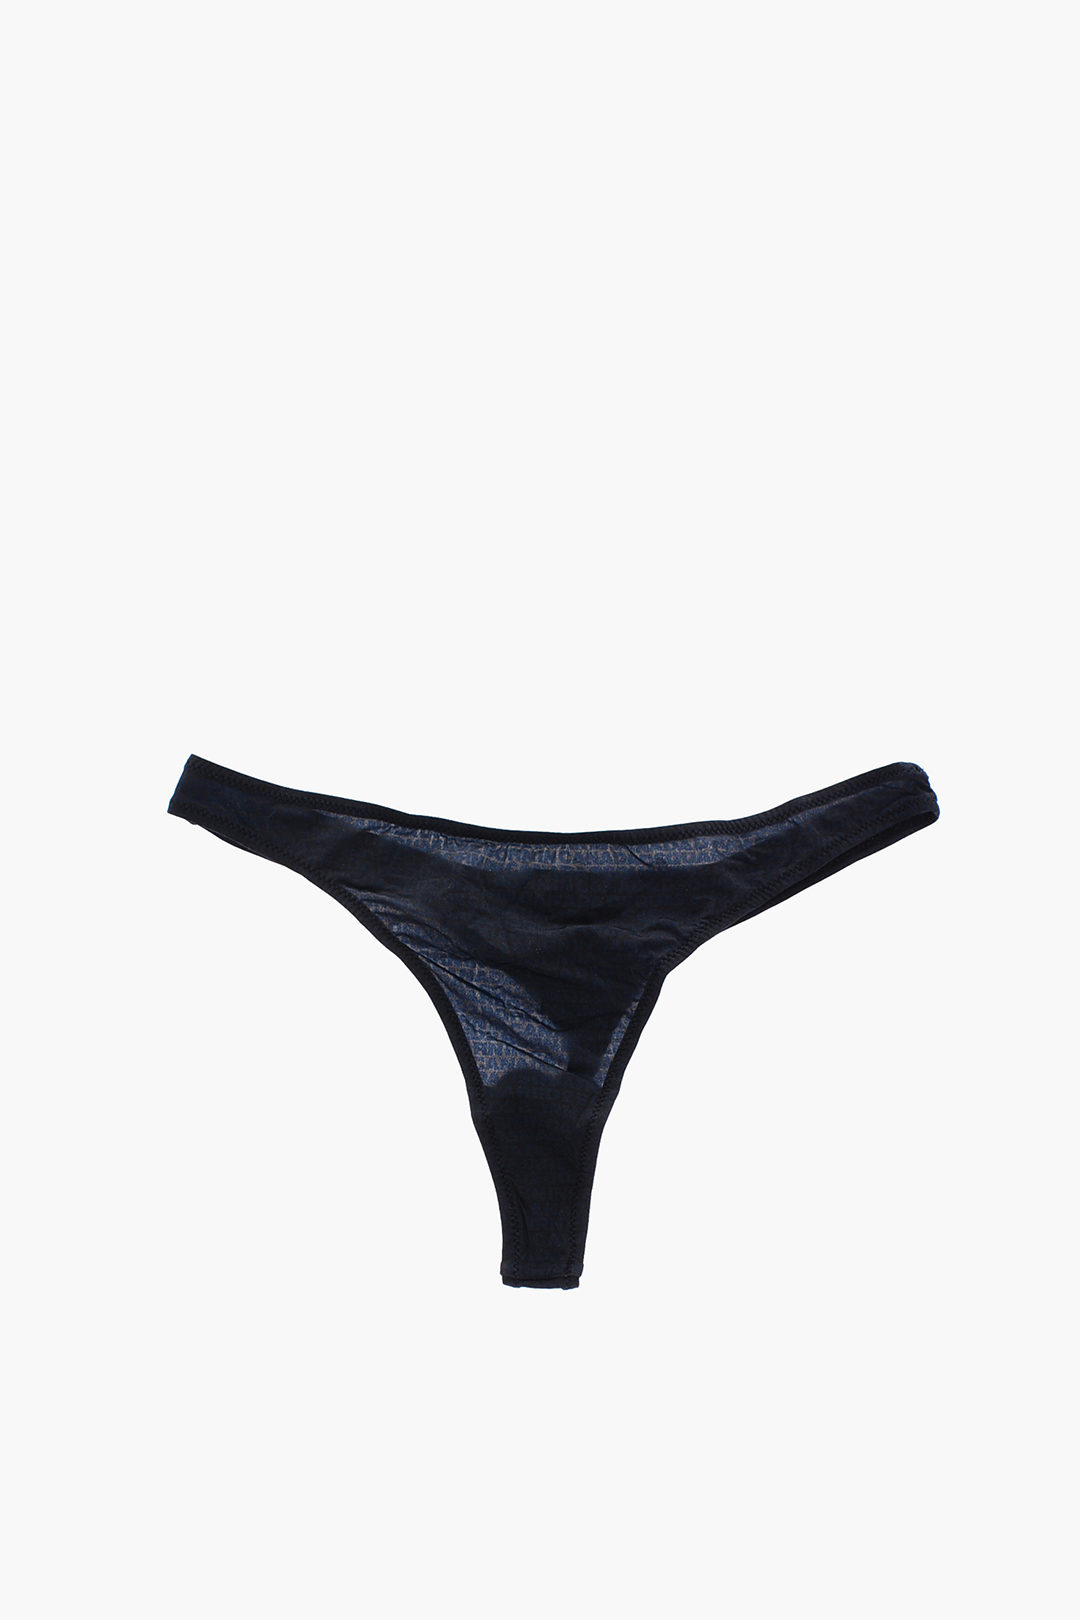 Dsquared2 all over logo thong women - Glamood Outlet